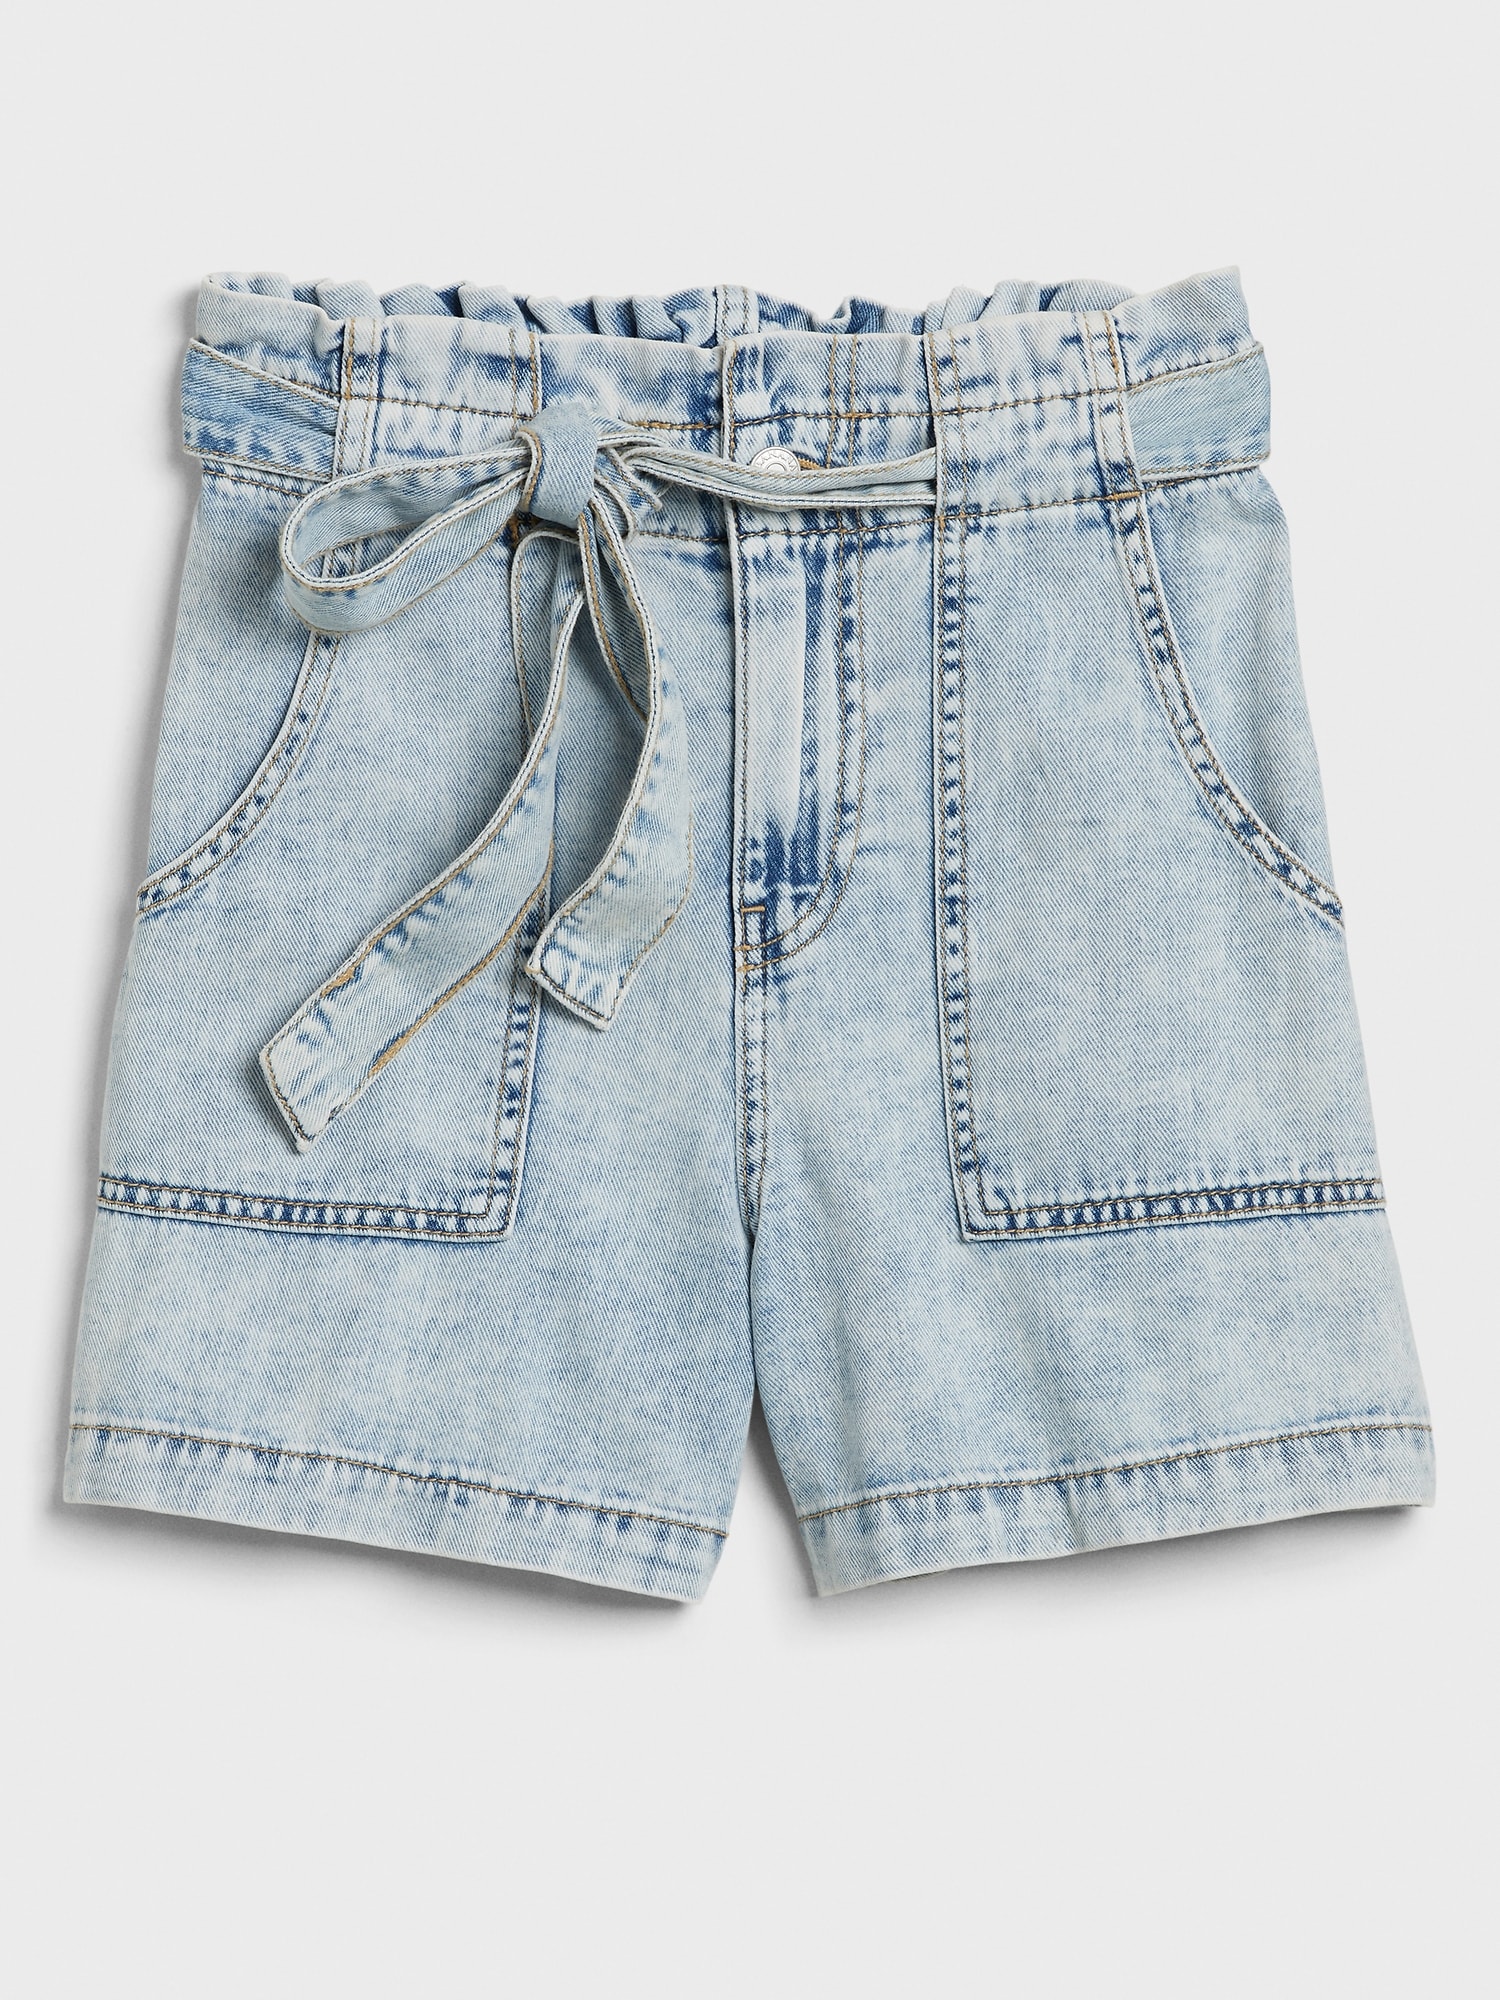 jean shorts with tie belt